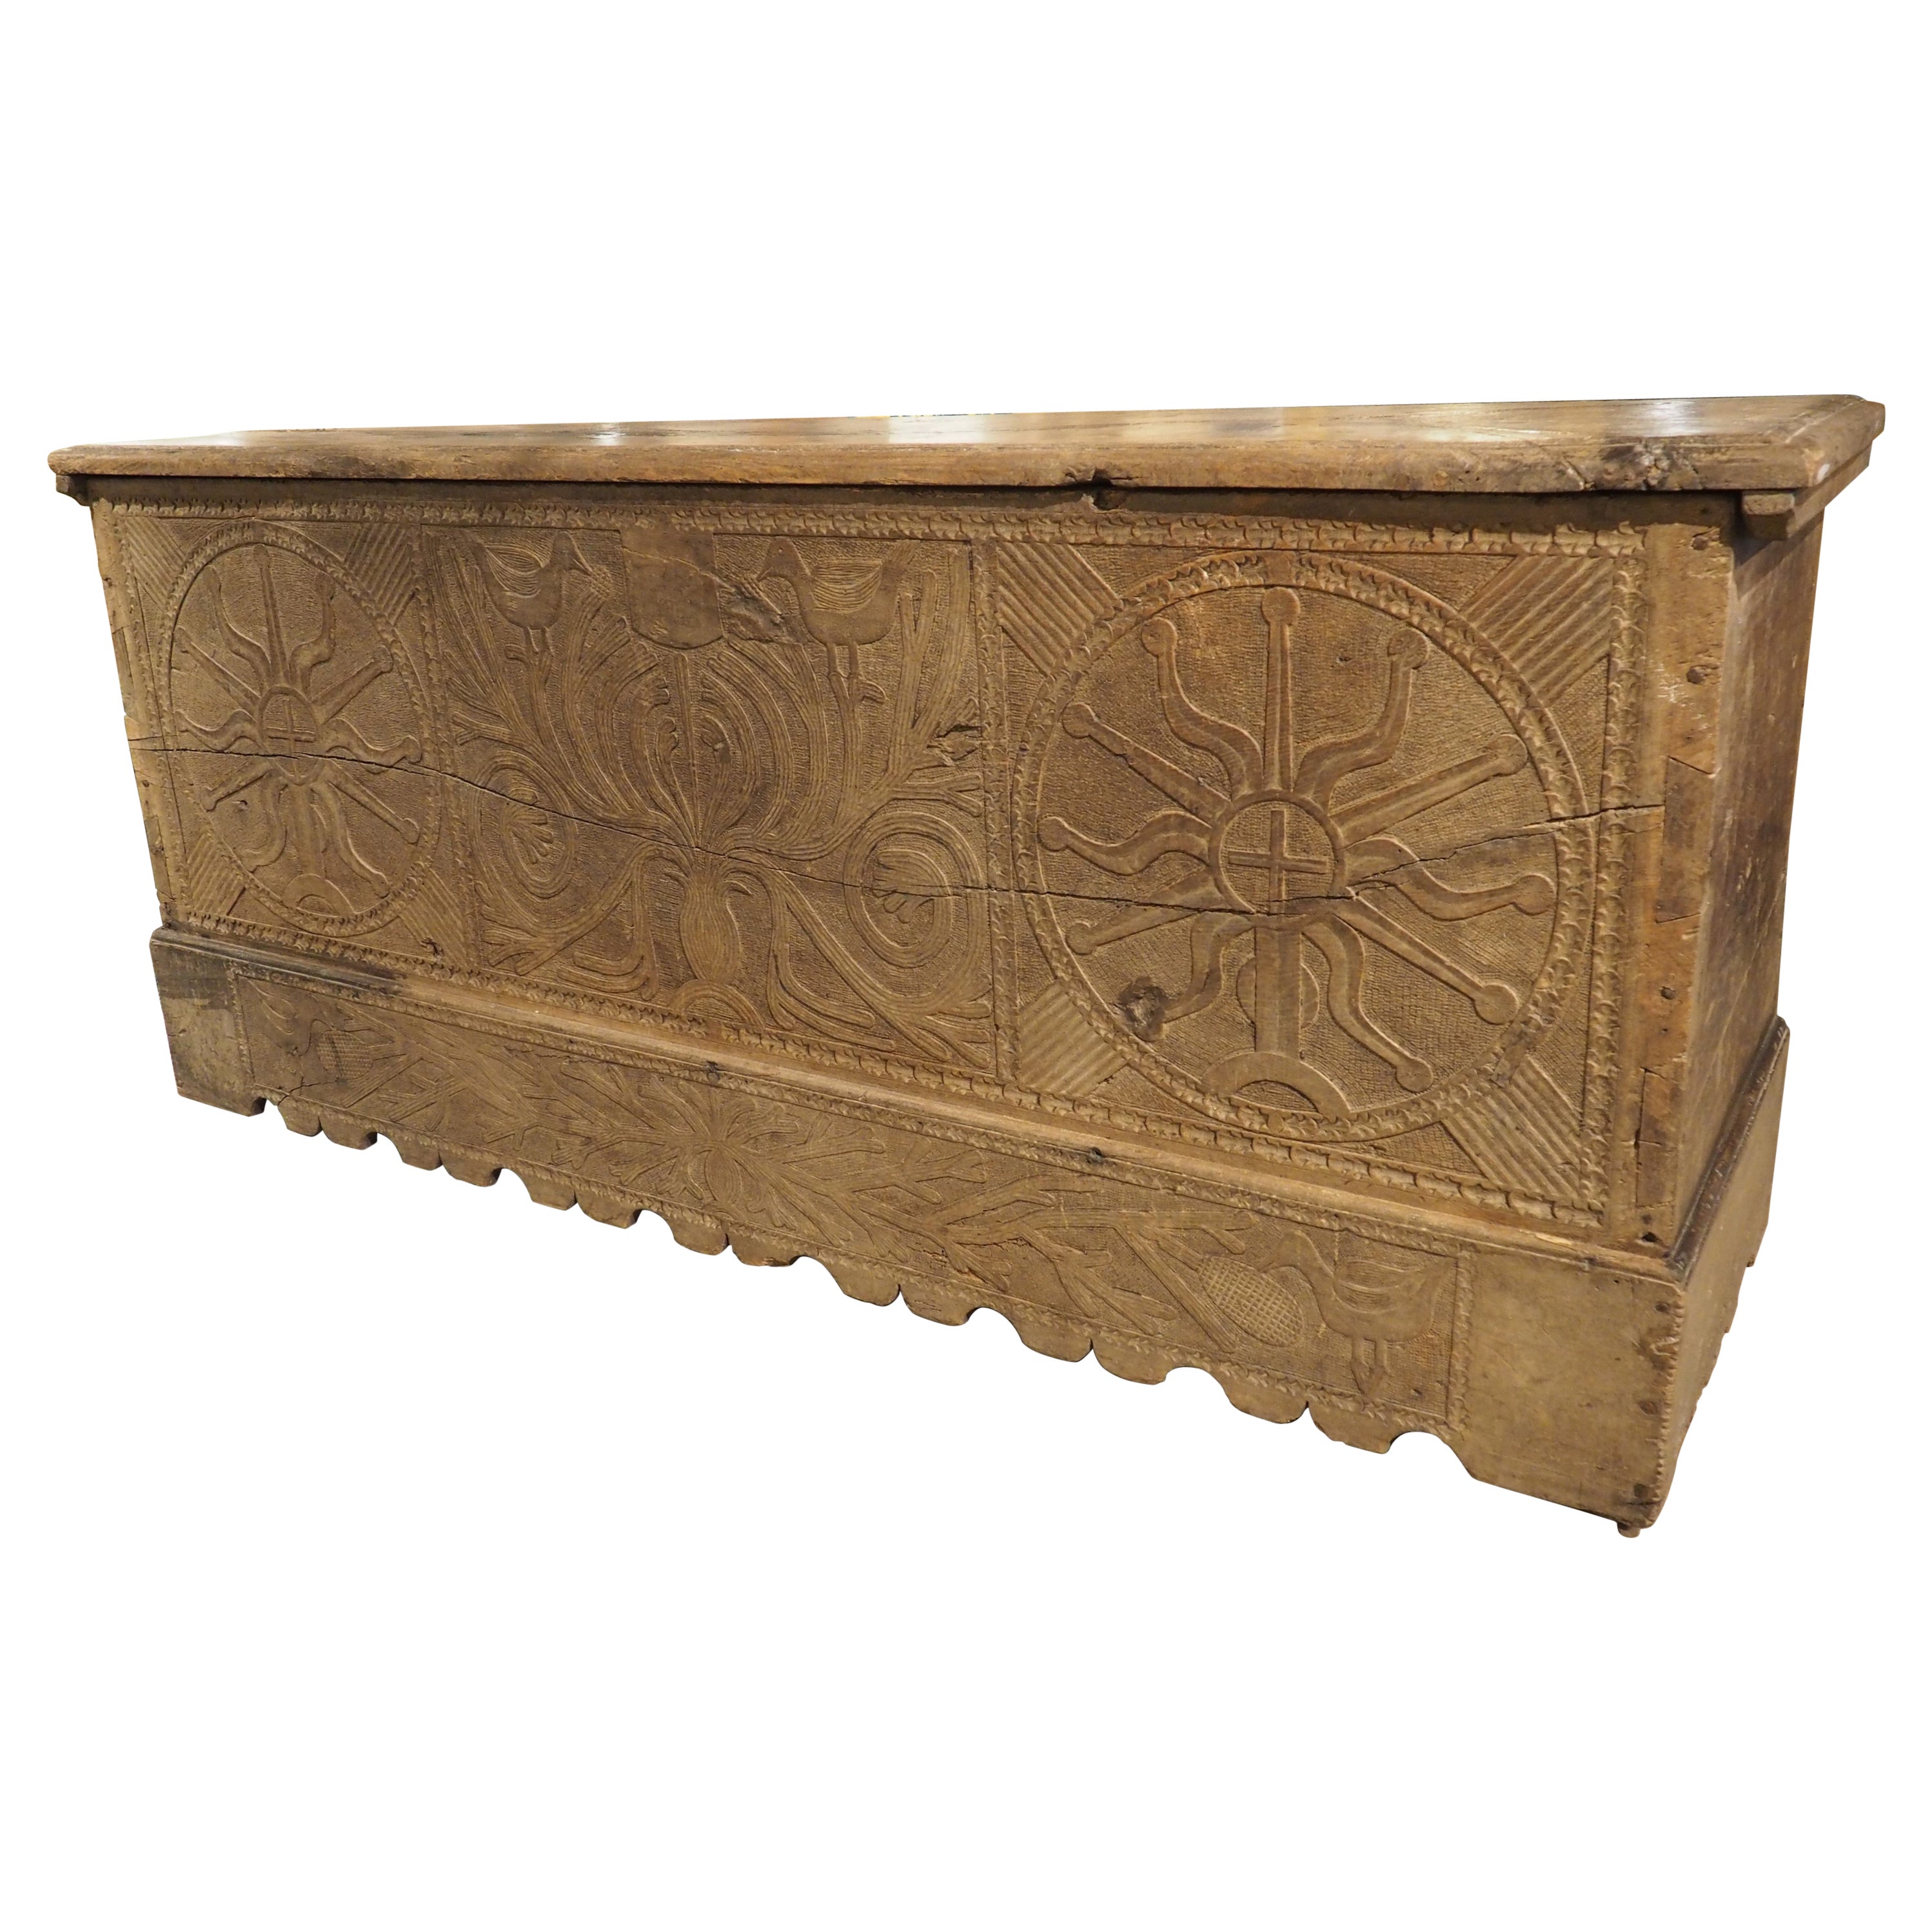 Huge Antique Carved Oak Chest or Trunk from Spain, Late 1500s to Early 1600s